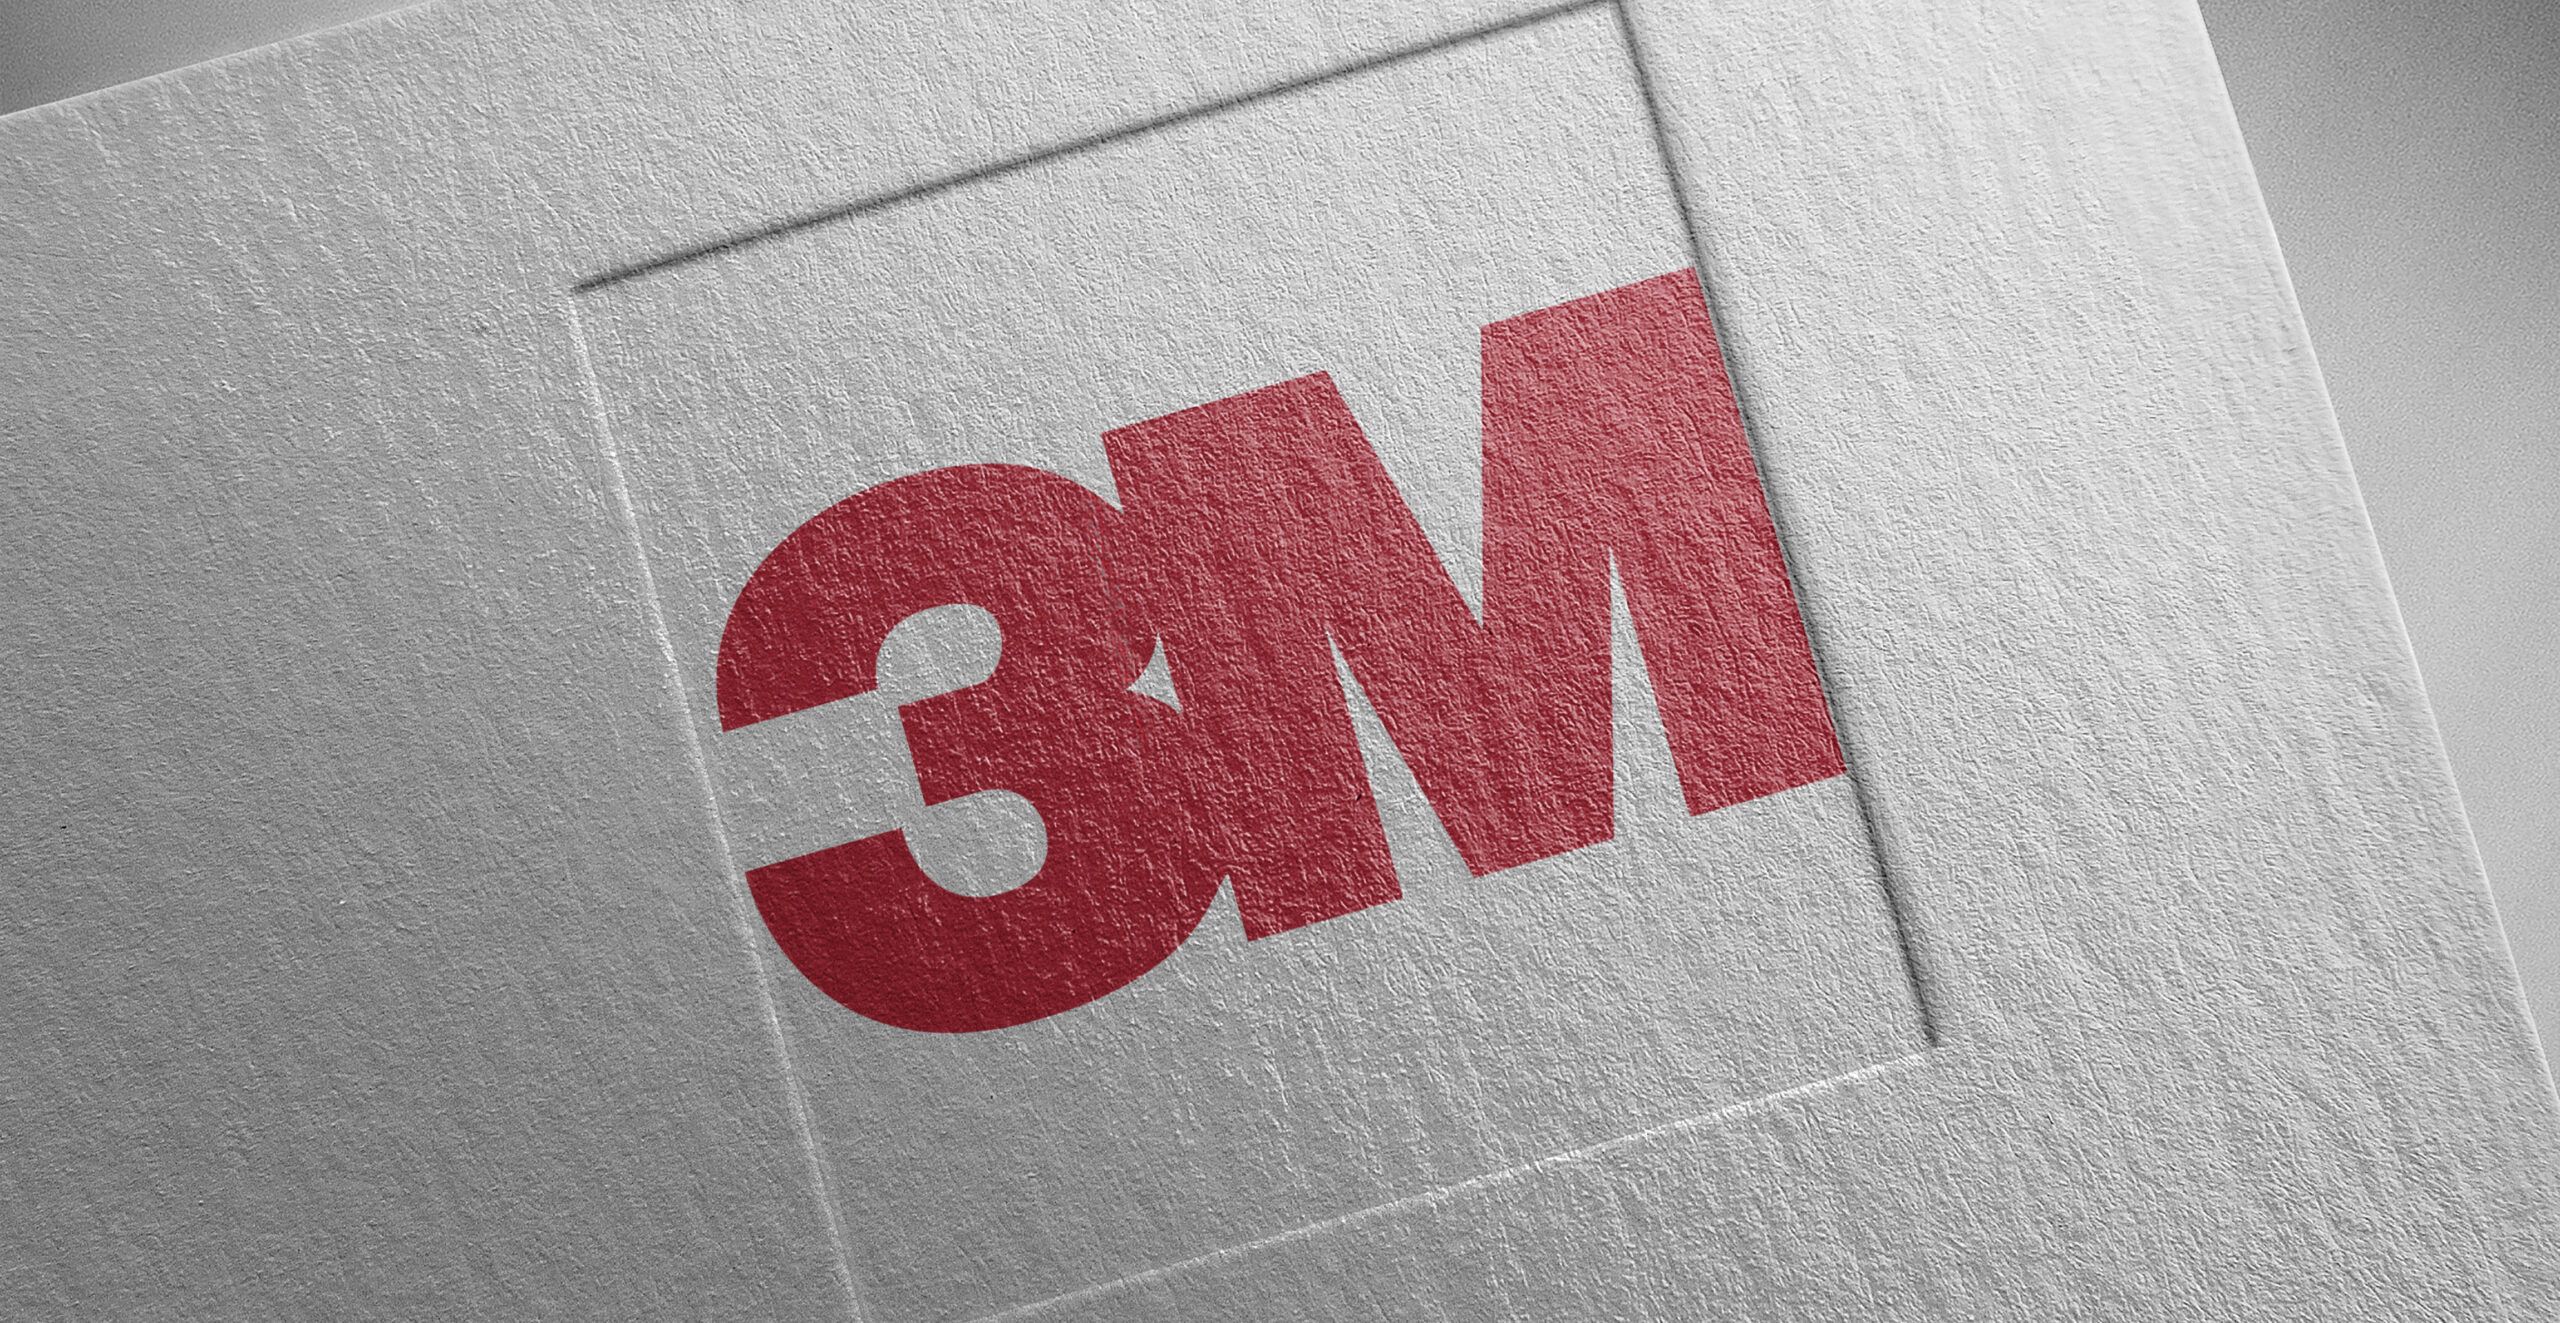 3m on paper texture